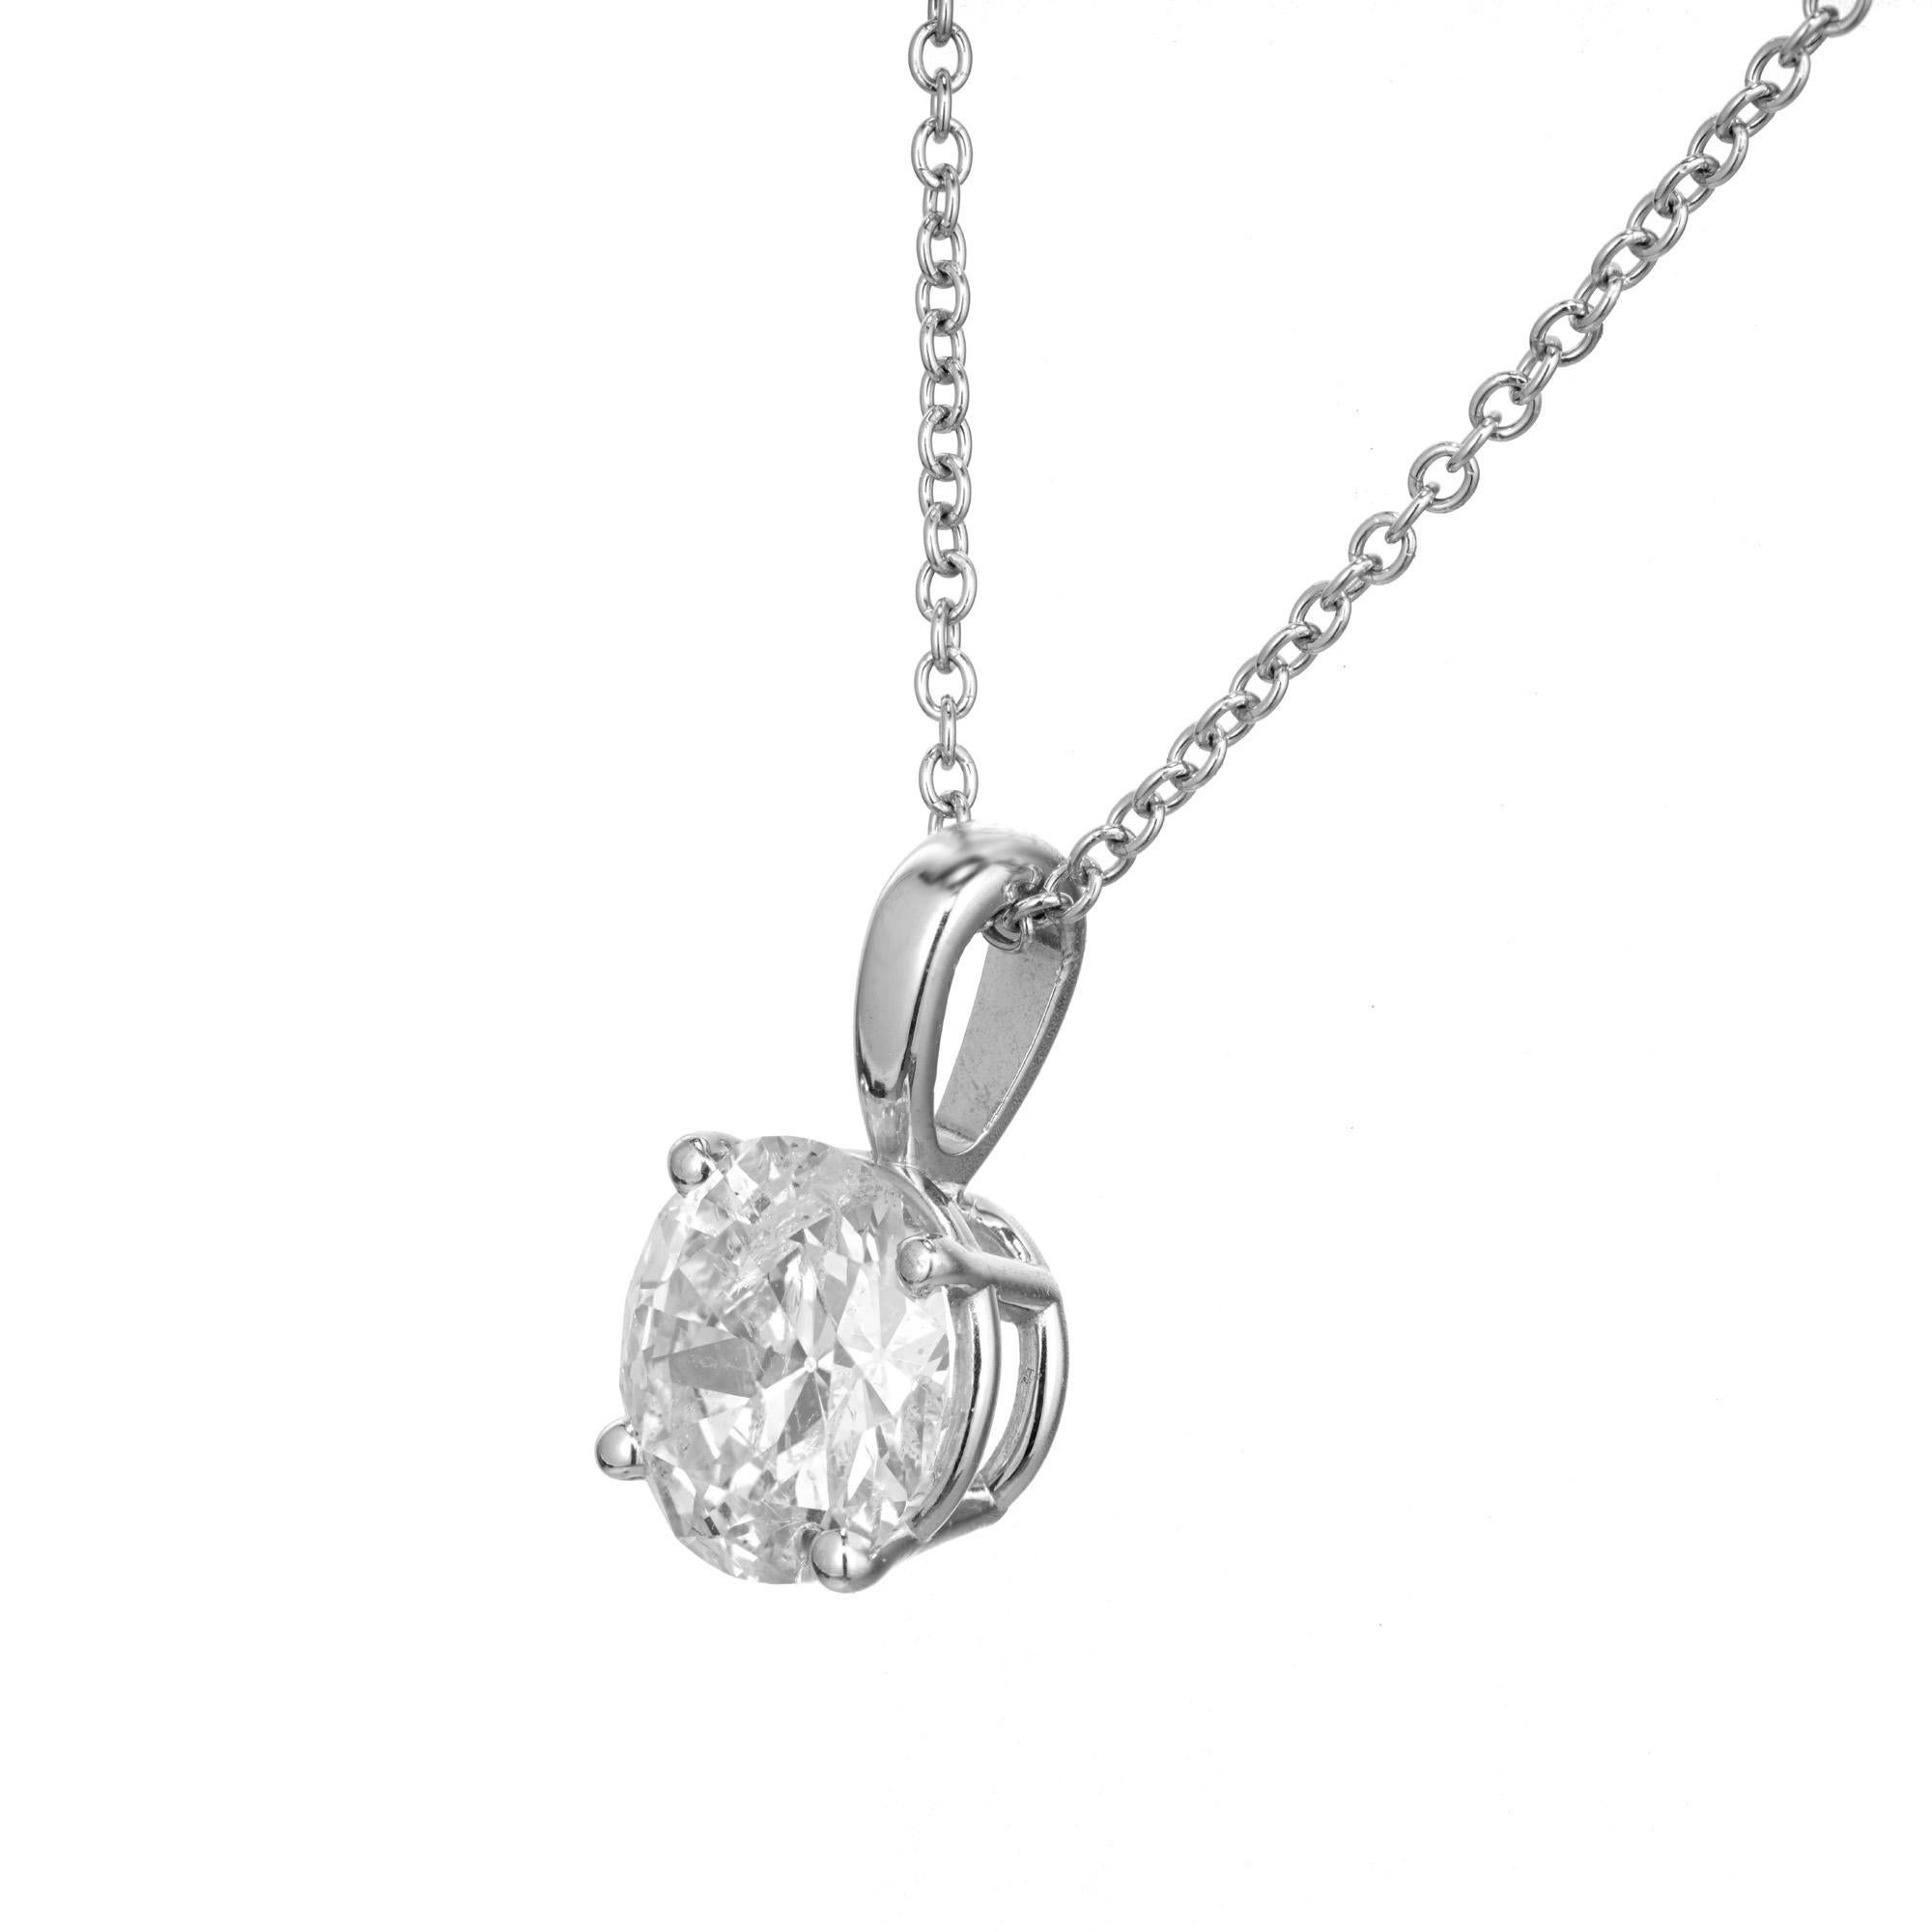 Designed and crafted in the Peter Suchy Workshop, This EGL certified 1.60ct round brilliant cut diamond sits in a classic four prong, platinum basket setting with a 18 inch platinum chain. Certified as H-I, near colorless. 

1 round brilliant cut